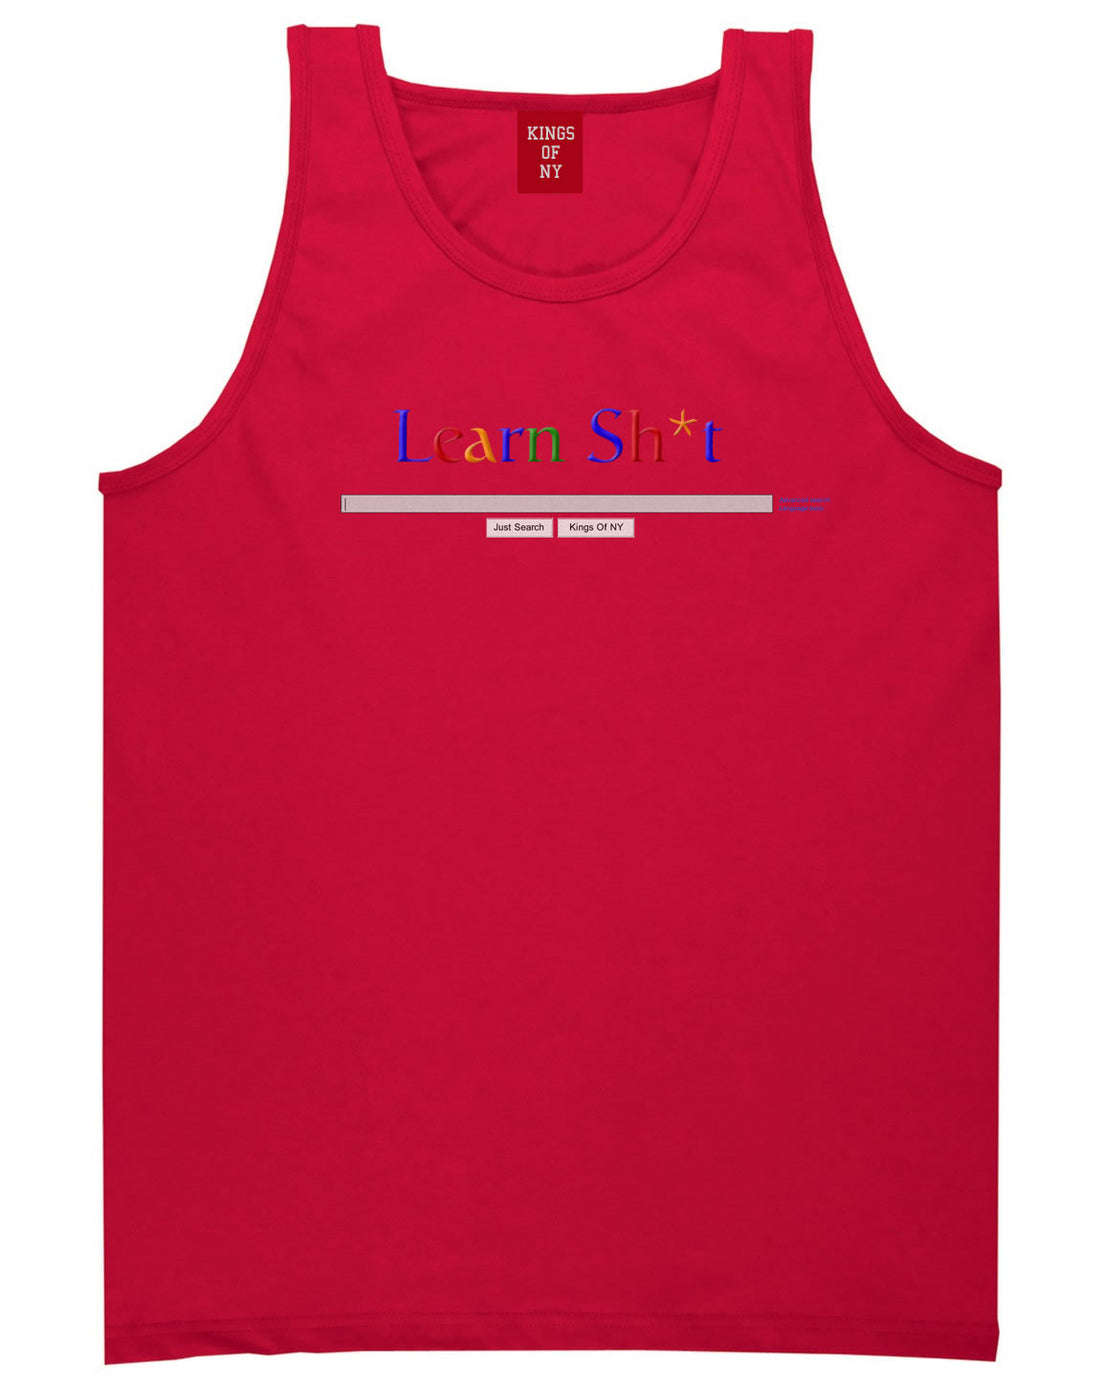 Learn Shit Search Tank Top in Red By Kings Of NY